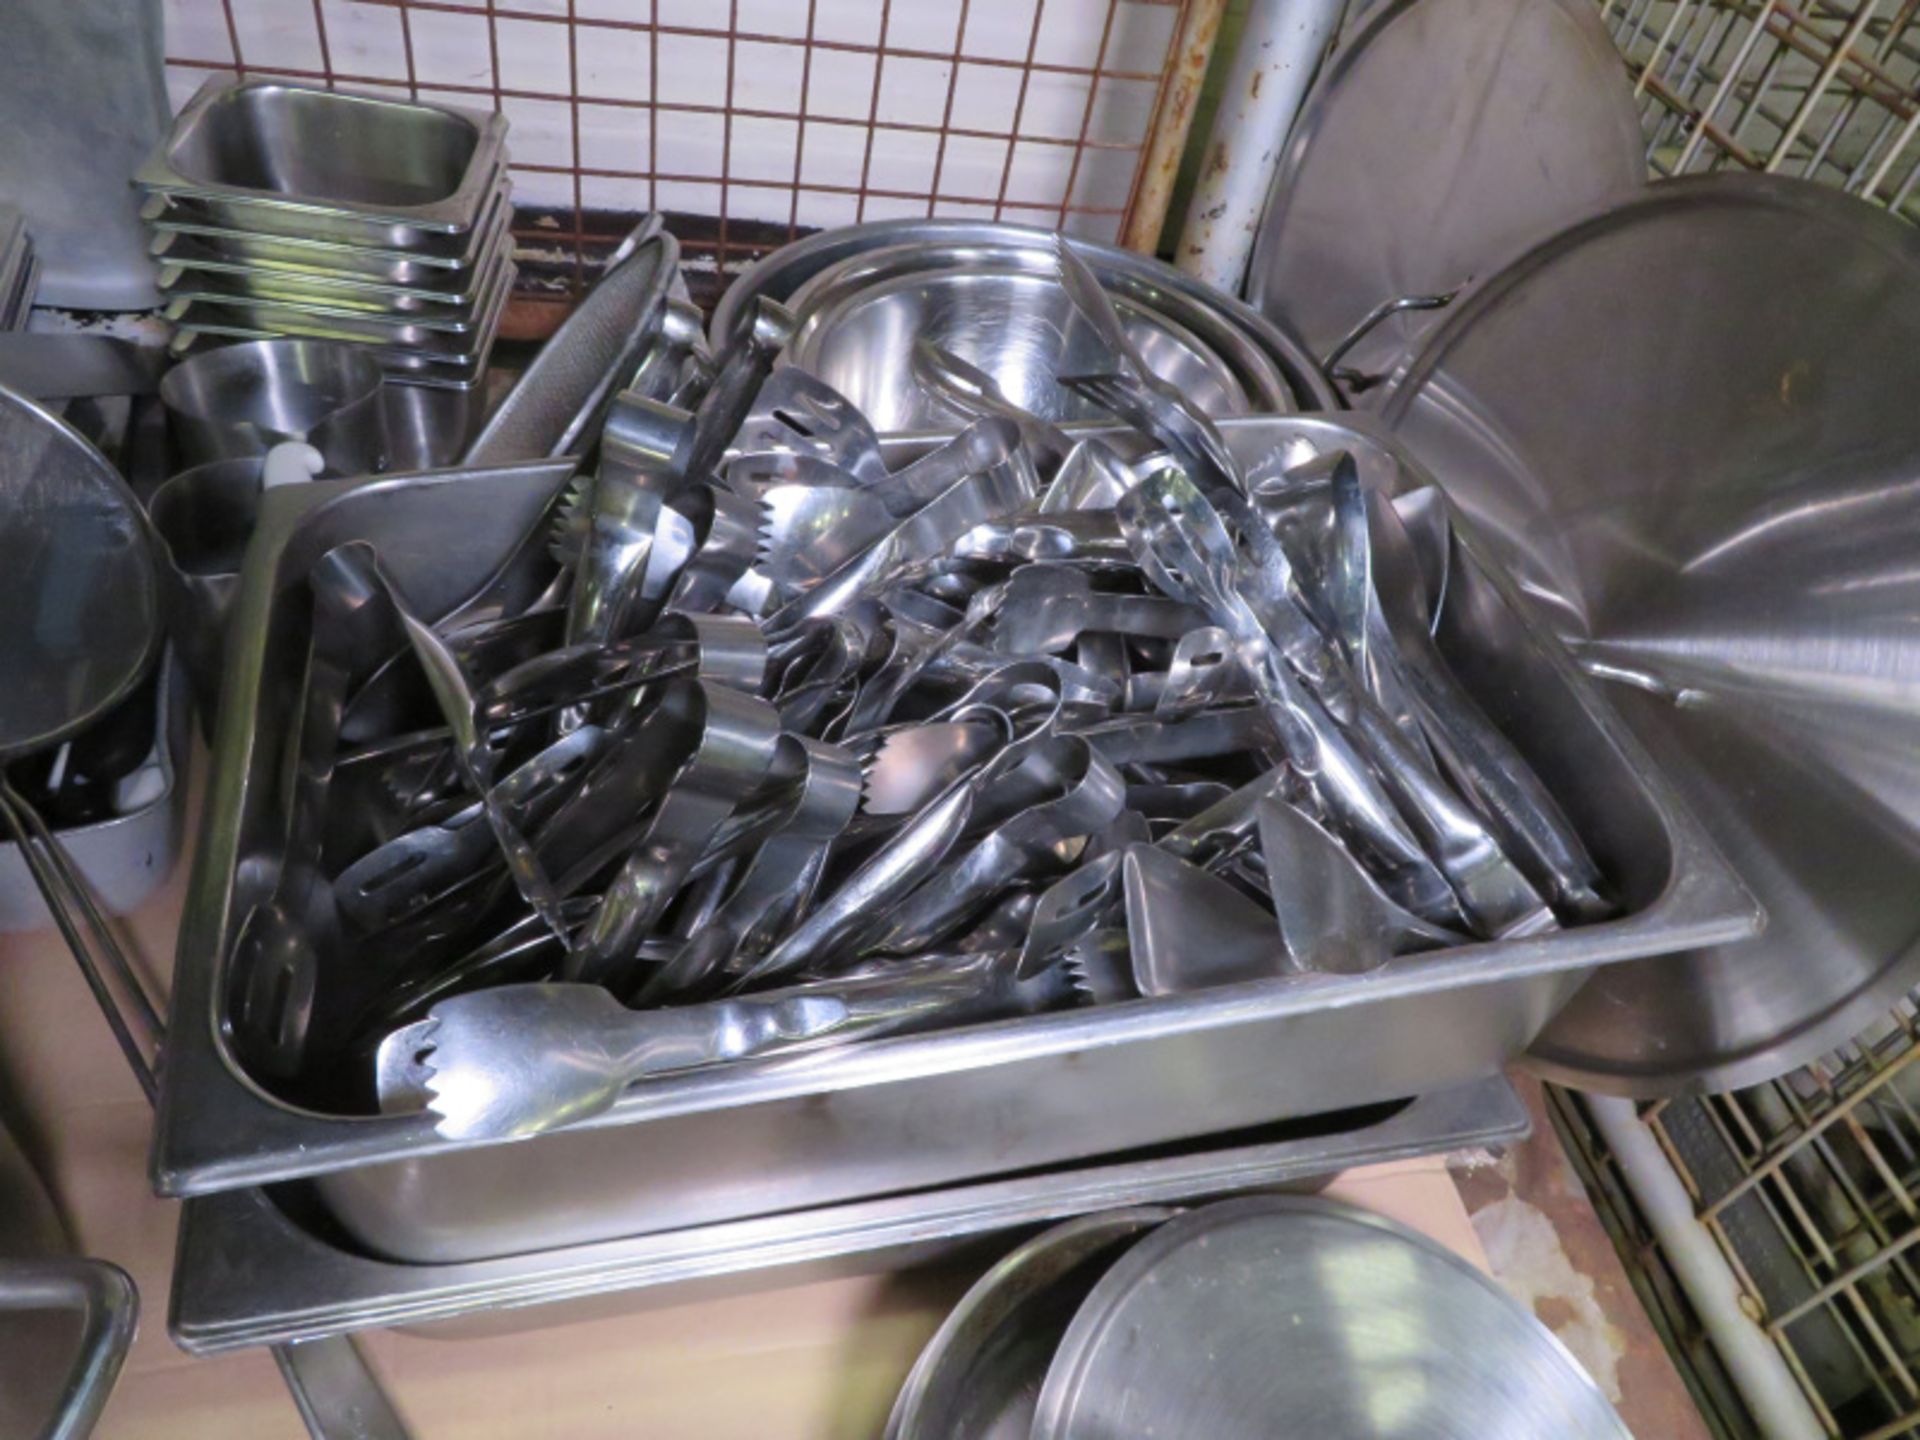 Stainless Steel Catering Equipment - gastronorm pans, cooking pot, shelf, pans, mixing bowls & more - Image 3 of 6